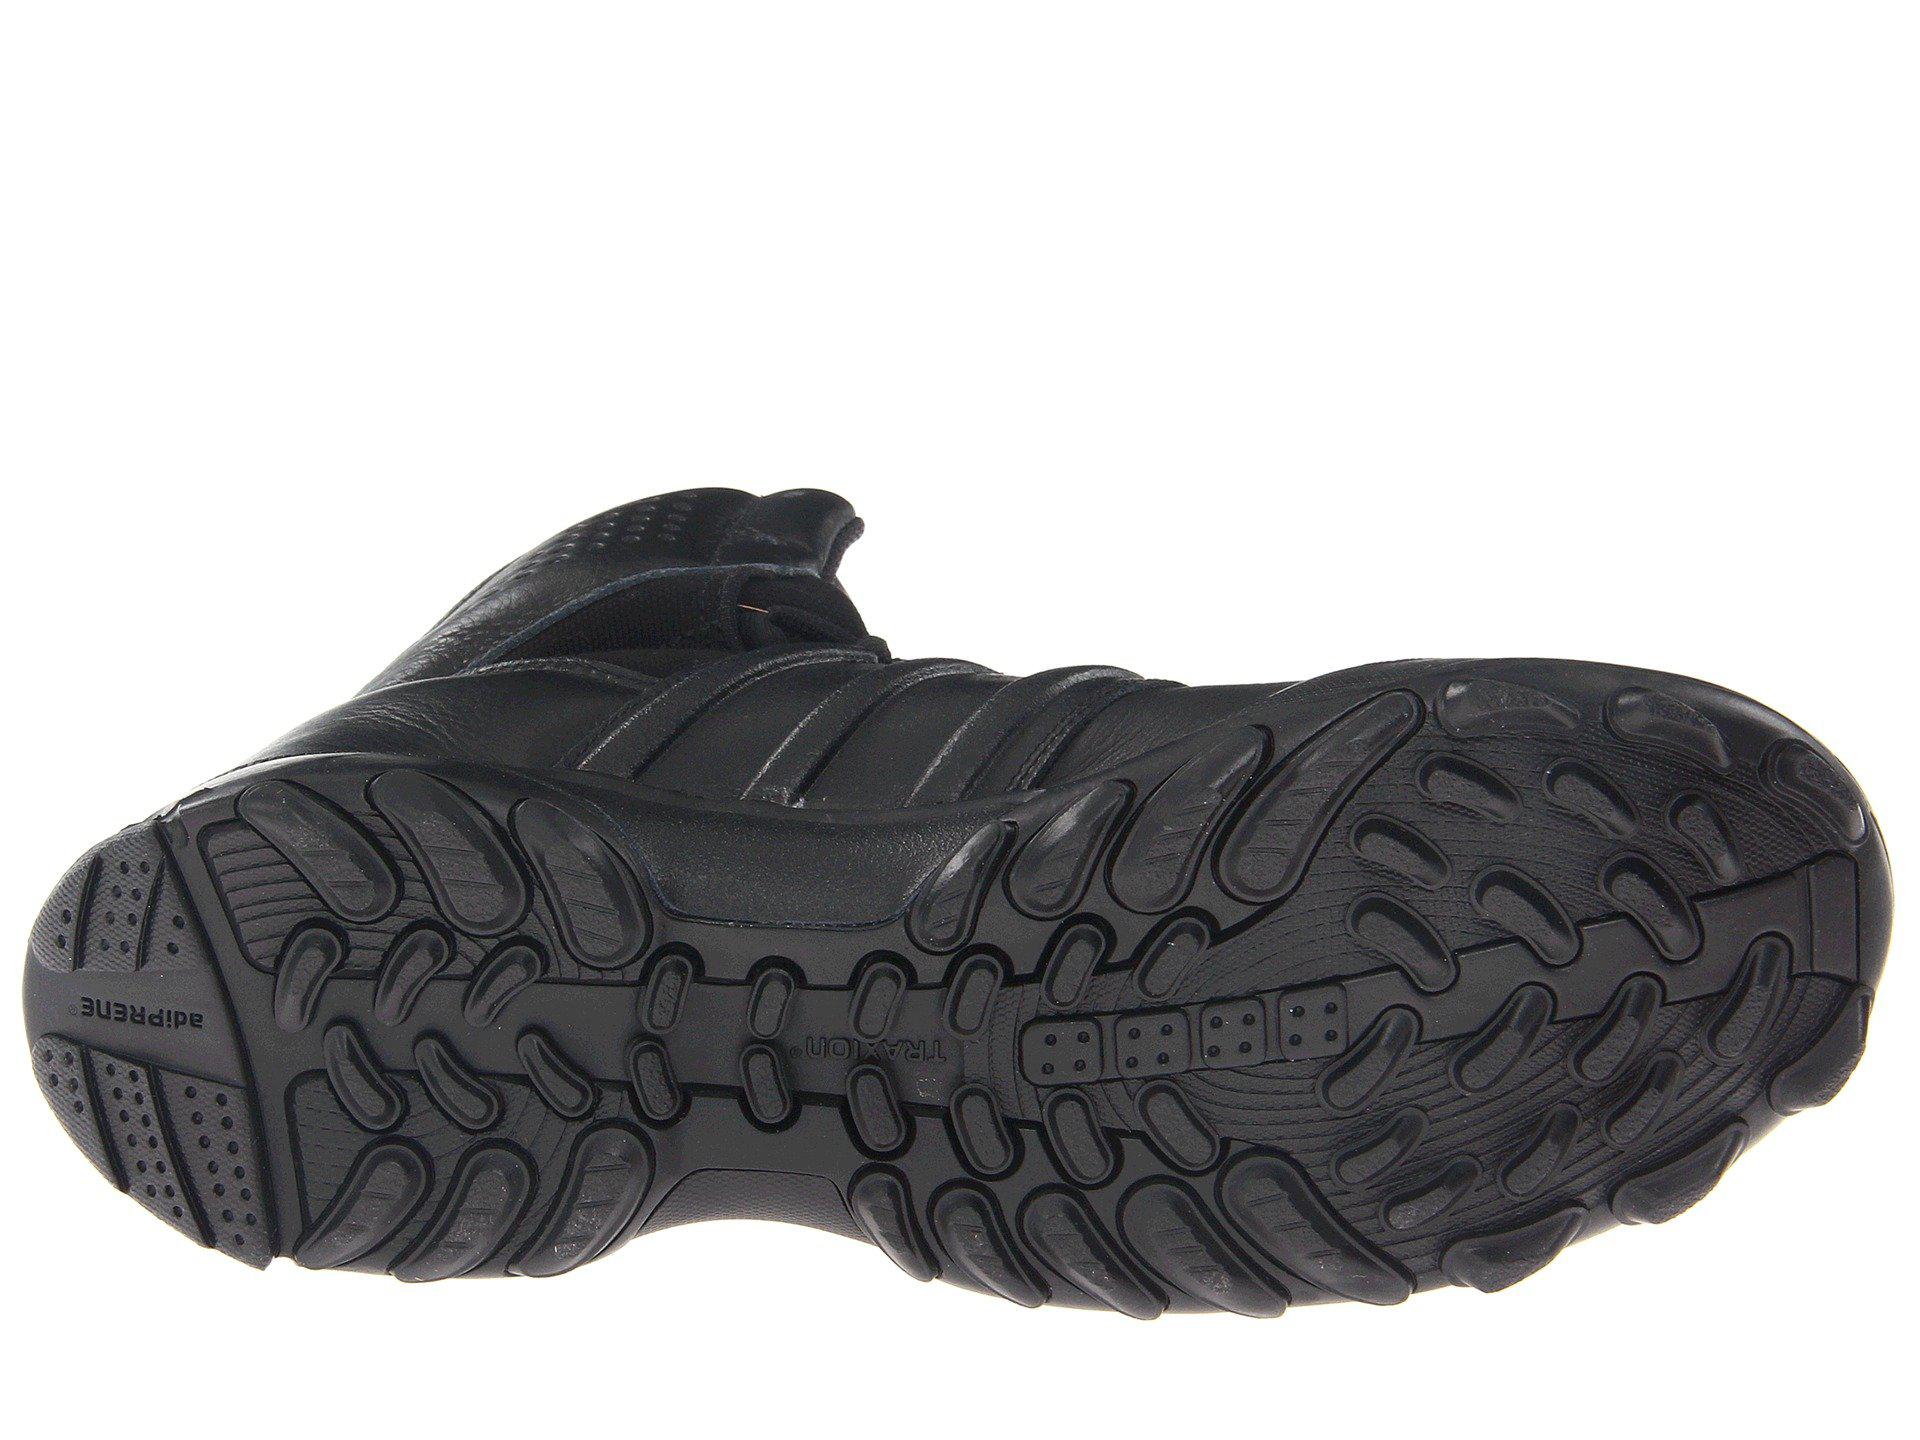 adidas Leather Gsg-9.7 Gymnastics Shoes in Black for Men - Lyst